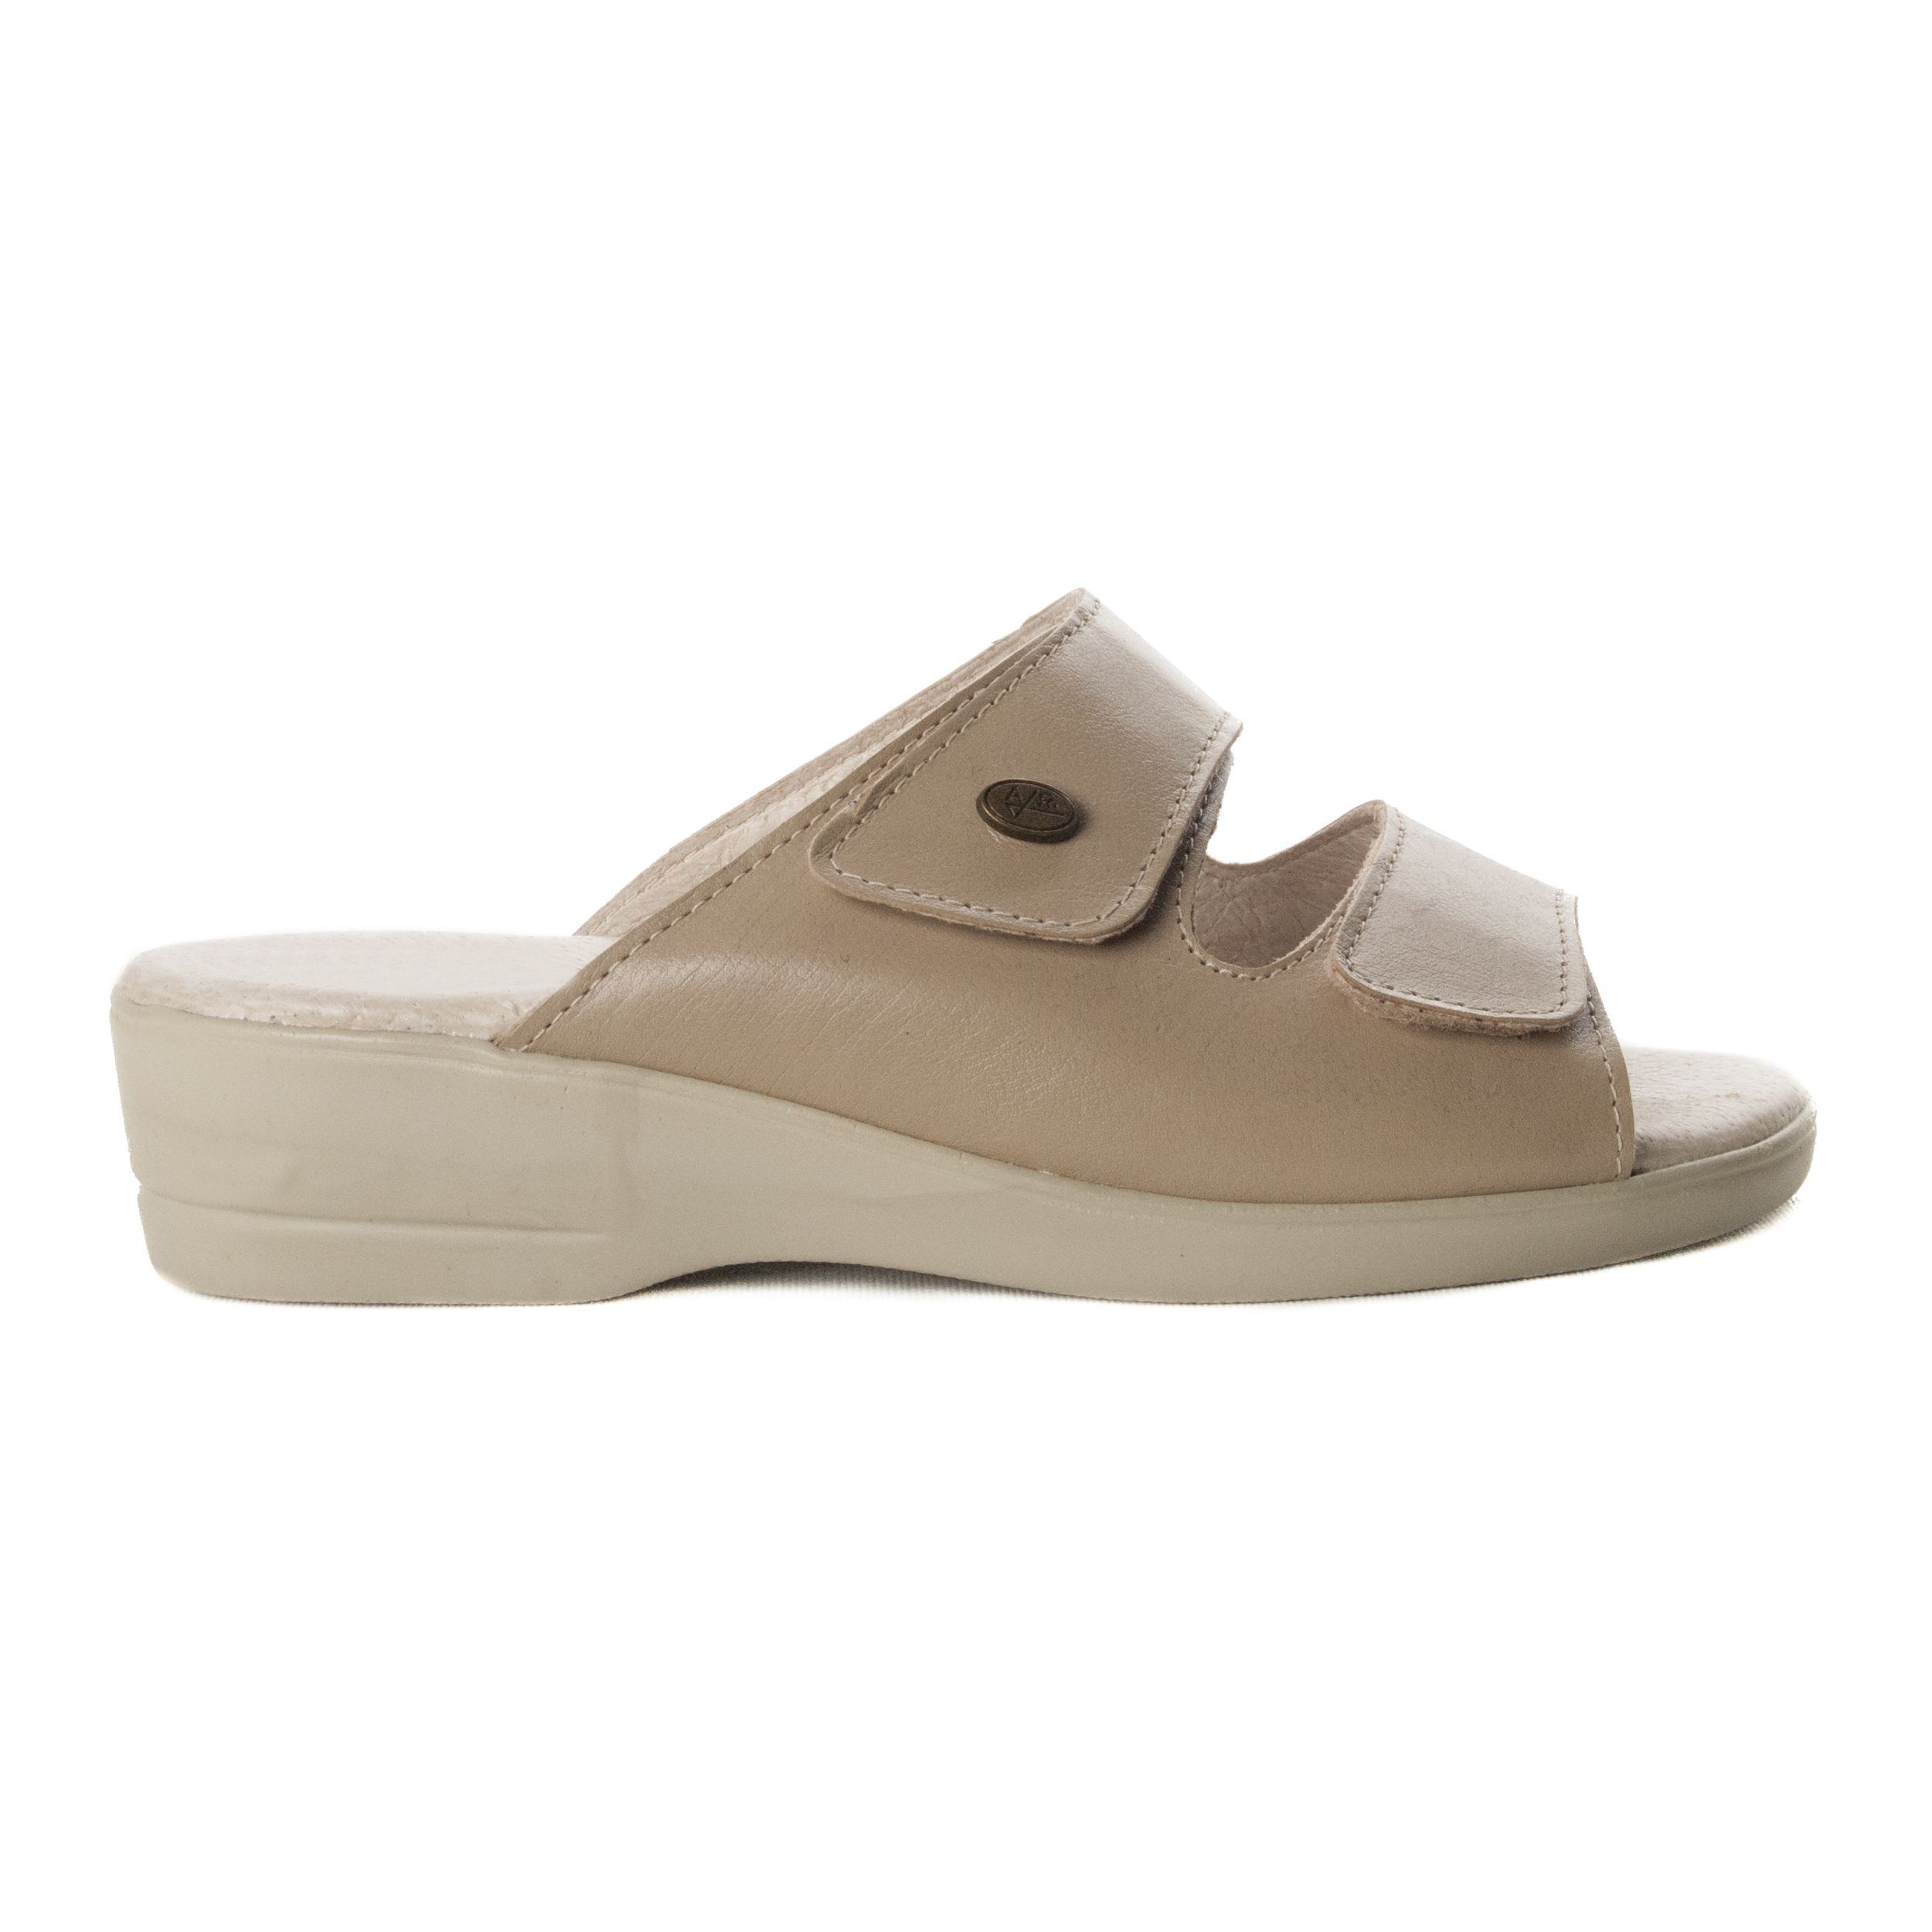 Woman skin sandal, with maximum comfort on the floor, by its gel, soft and padded template. Anatomical Sandal with two wide strips on the front. Fastened with Velcros. Very summer for his style. No brooch. Made in Spain,